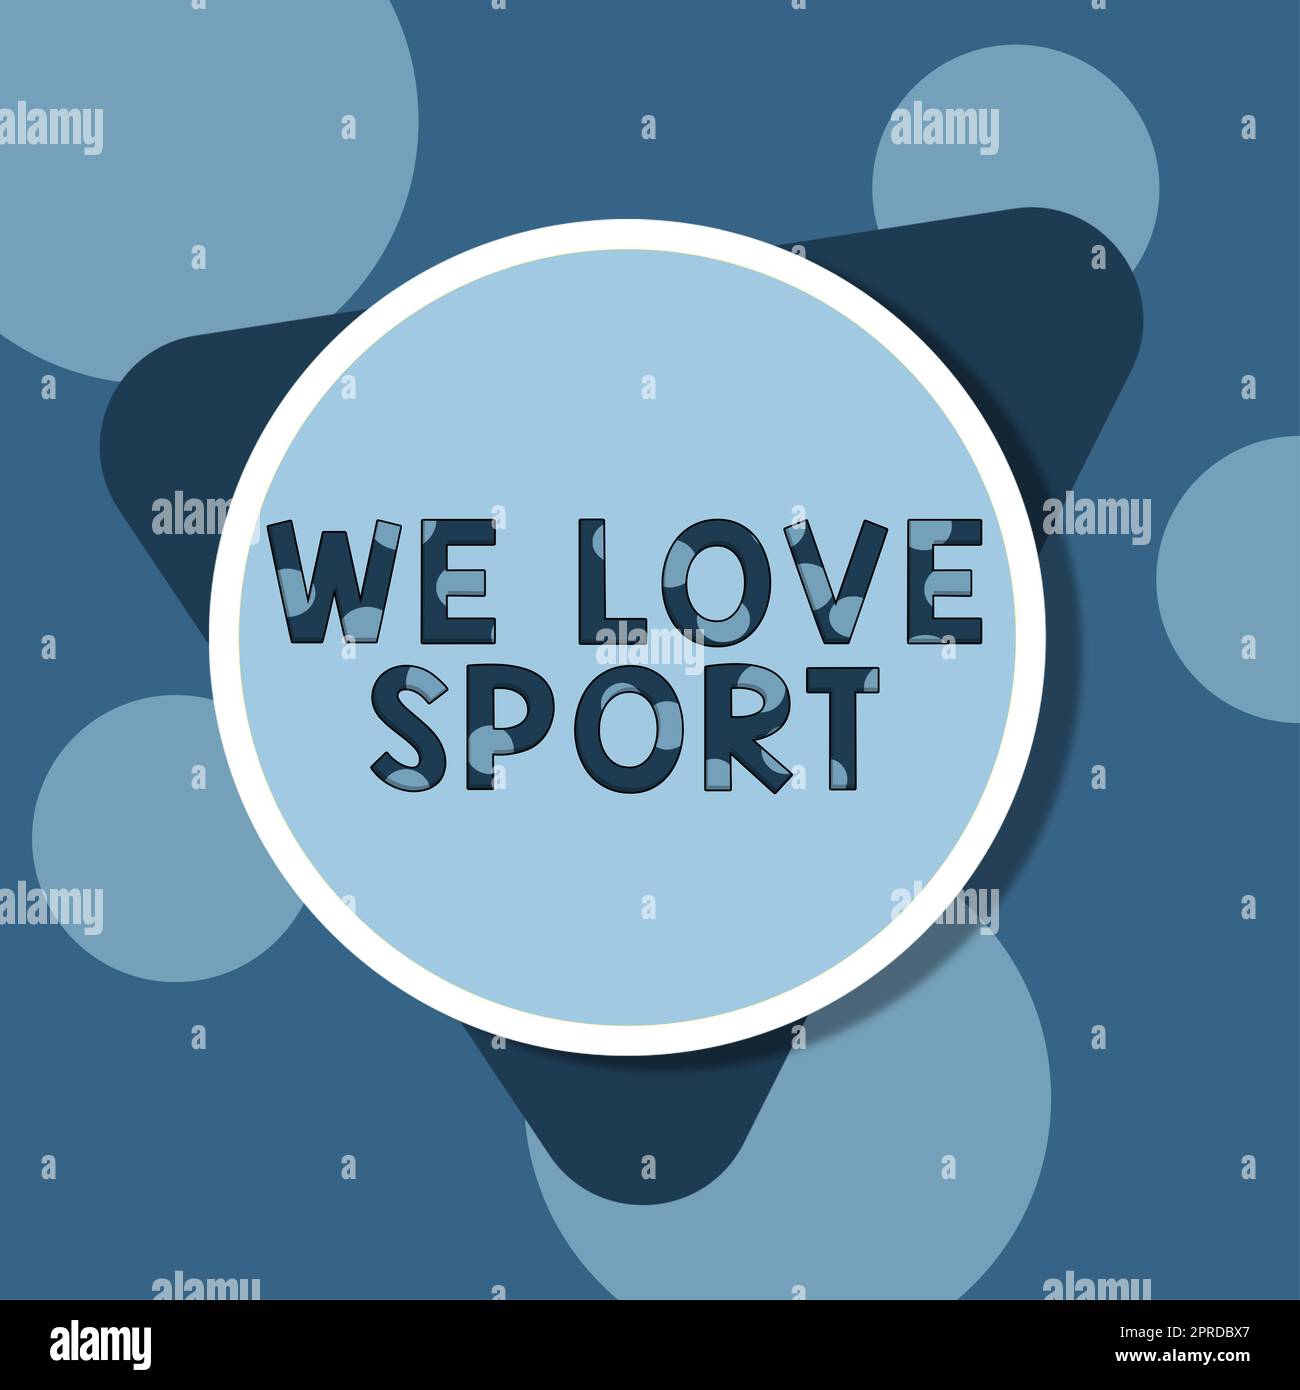 Hand writing sign We Love Sport. Internet Concept To like a lot practicing sports athletic activities work out Blank Circular And Triangle Shapes For Promotion Of Business. Stock Photo